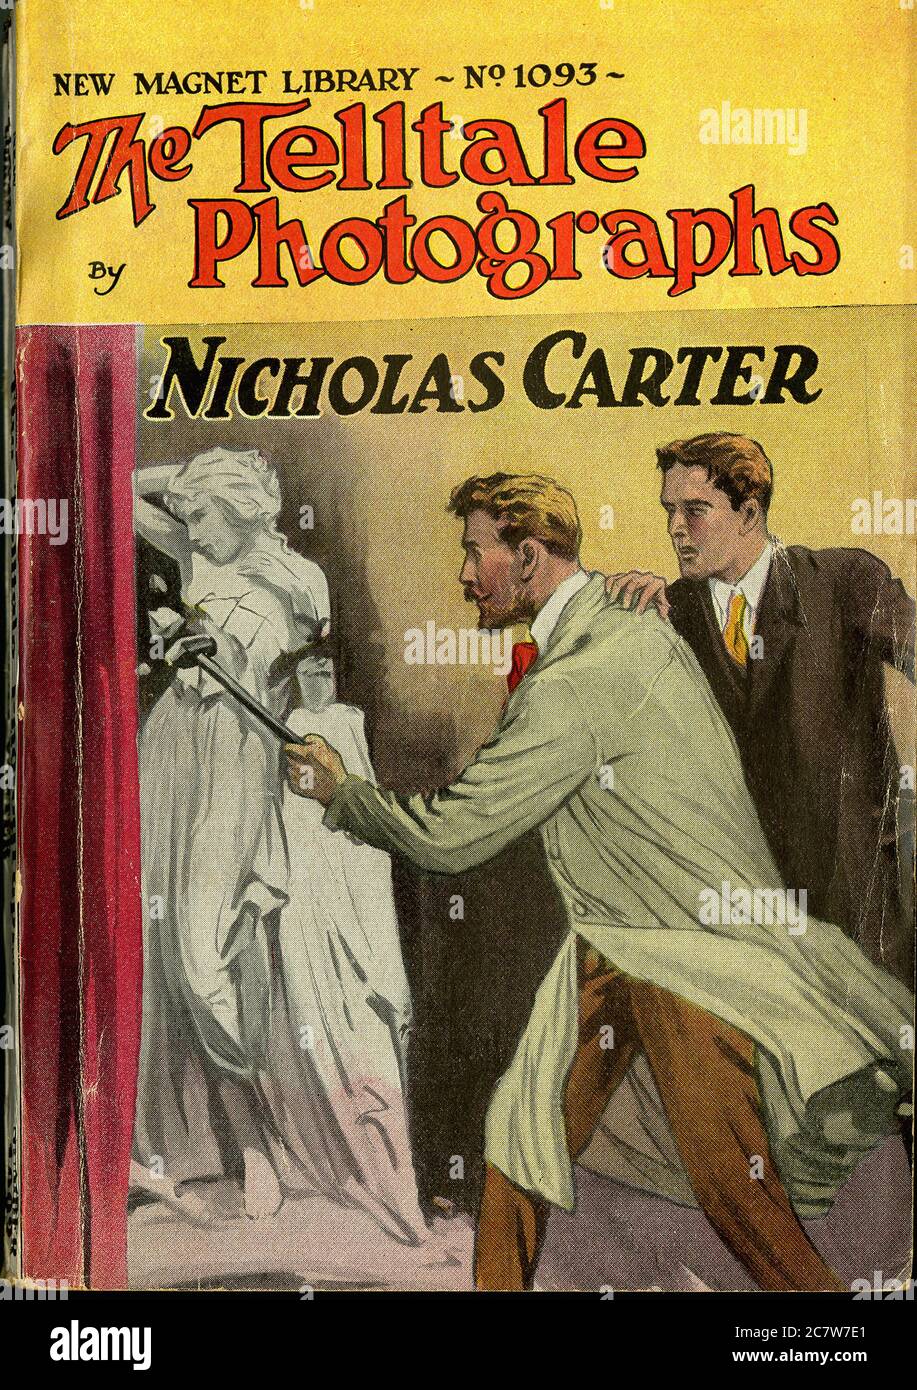 Nicholas Carter - The Telltale Photographs - New Magnet Library - Vintage Pulp Literary Stock Photo